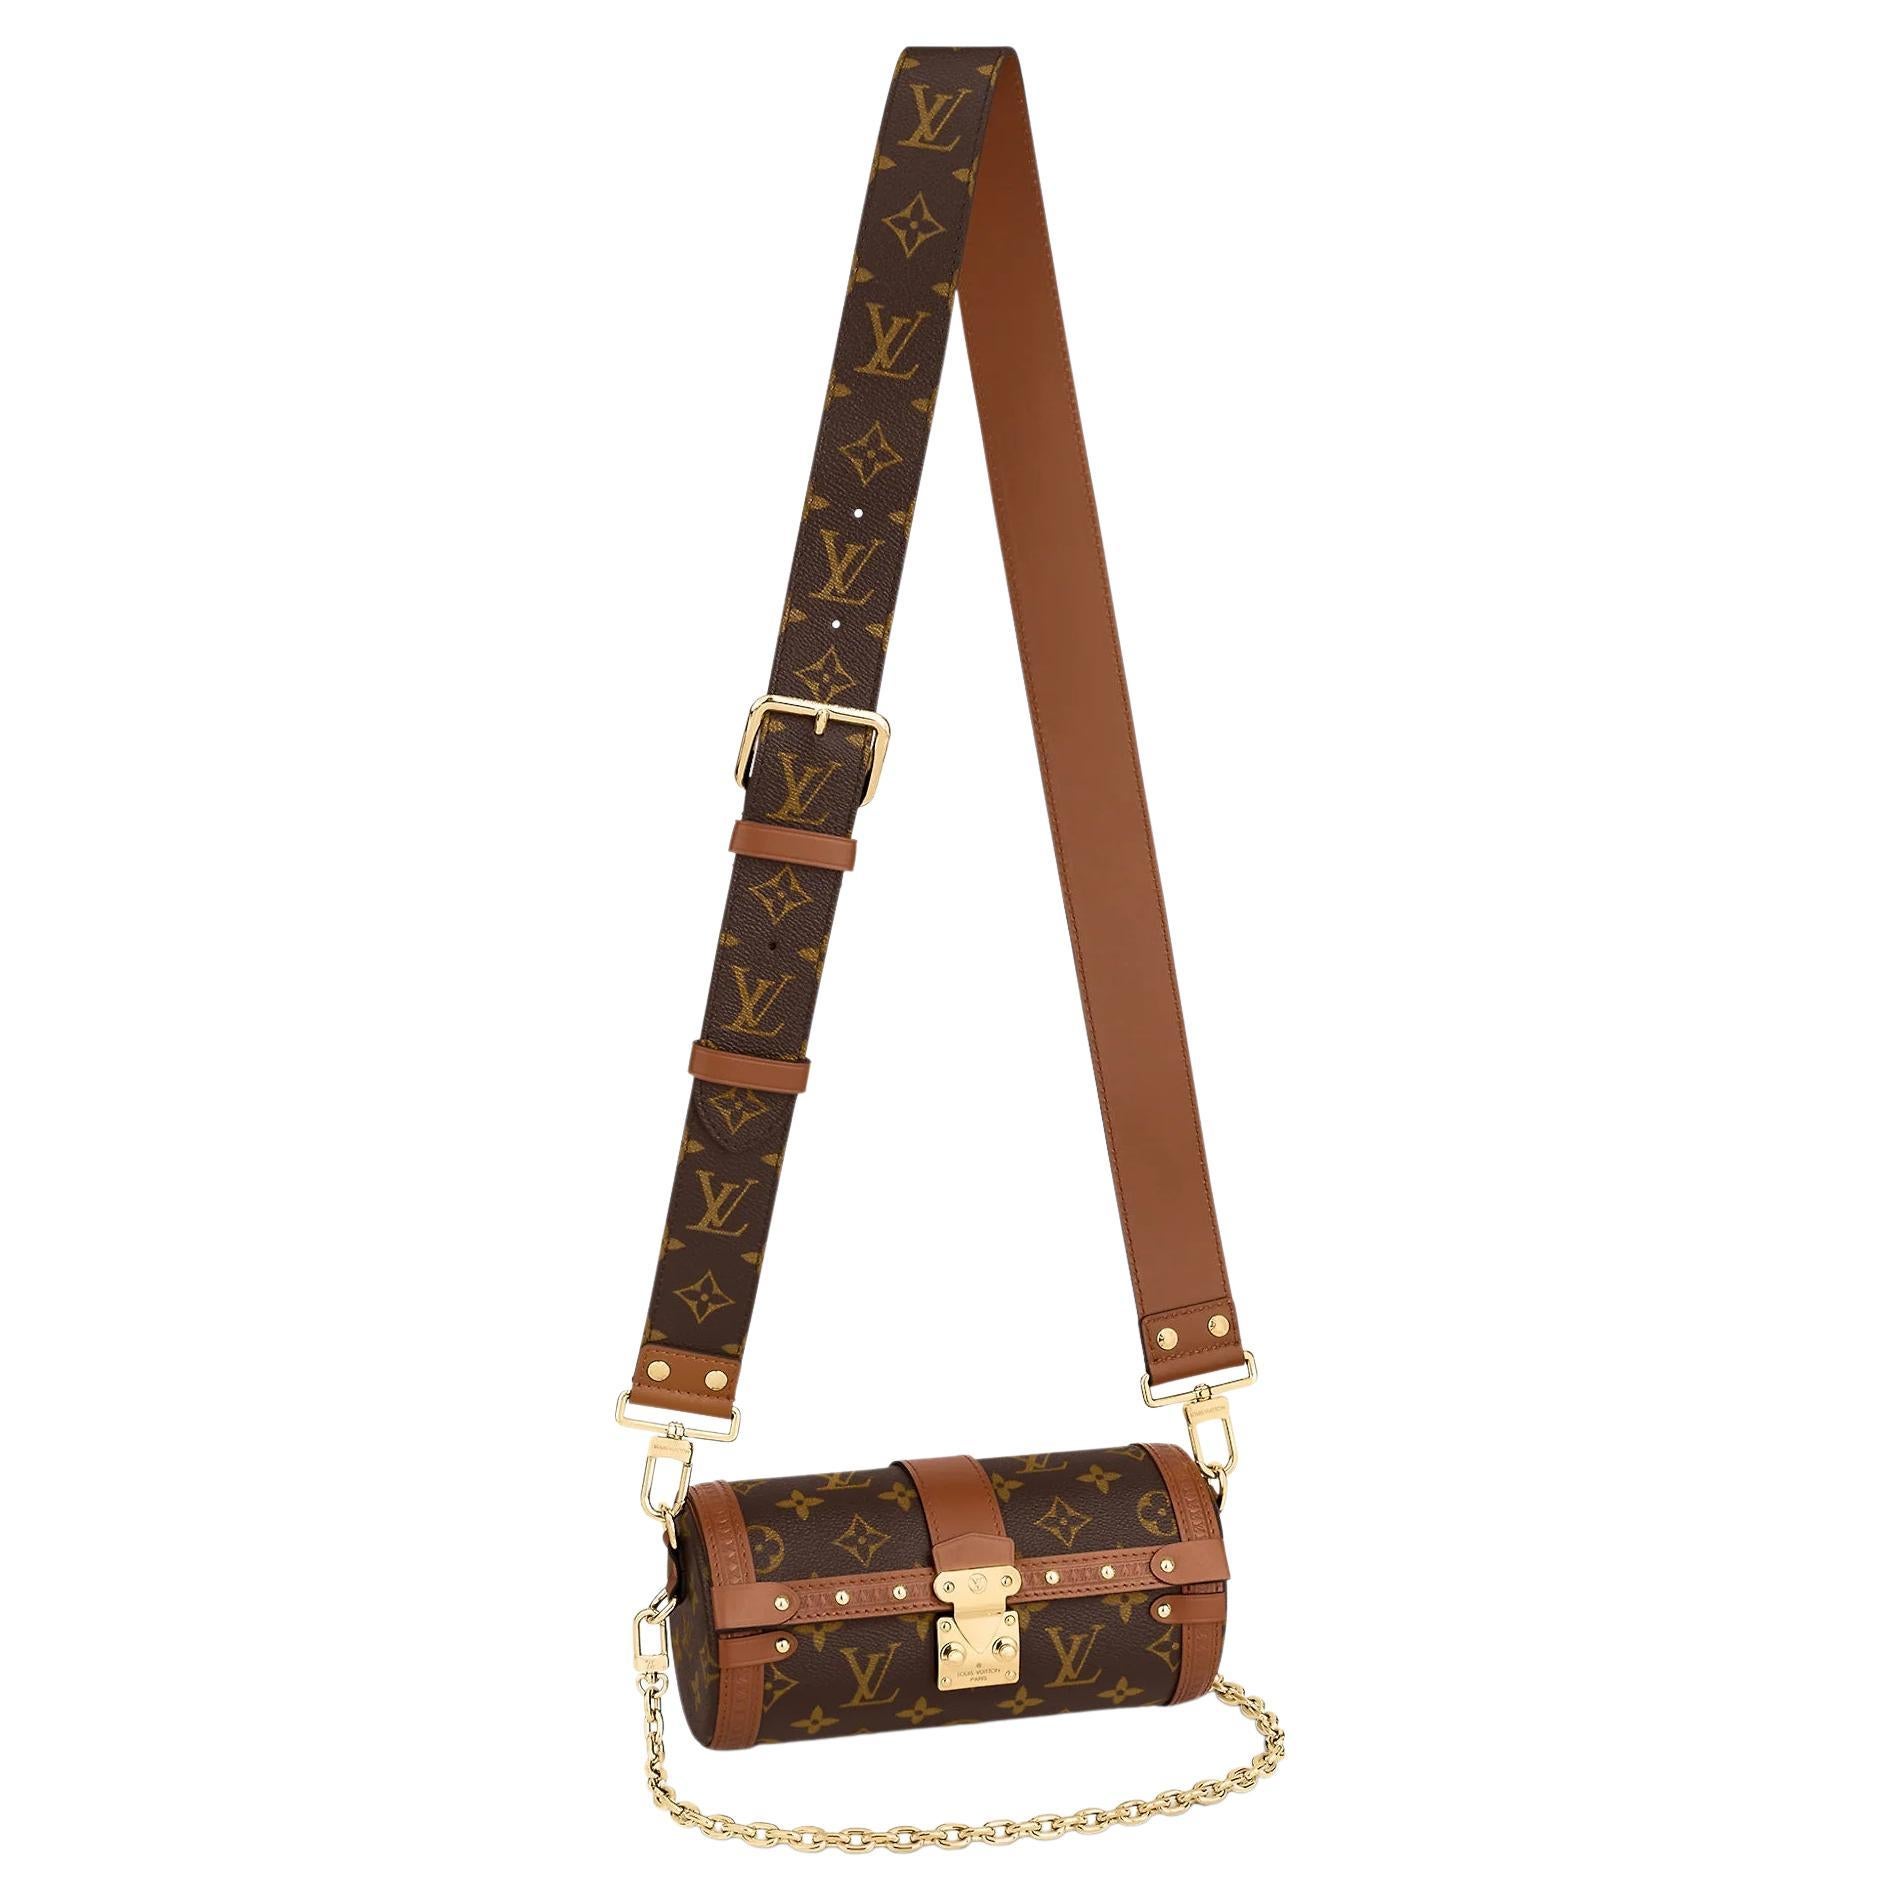 Vintage Louis Vuitton: Bags, Clothing & More - 9,796 For Sale at 